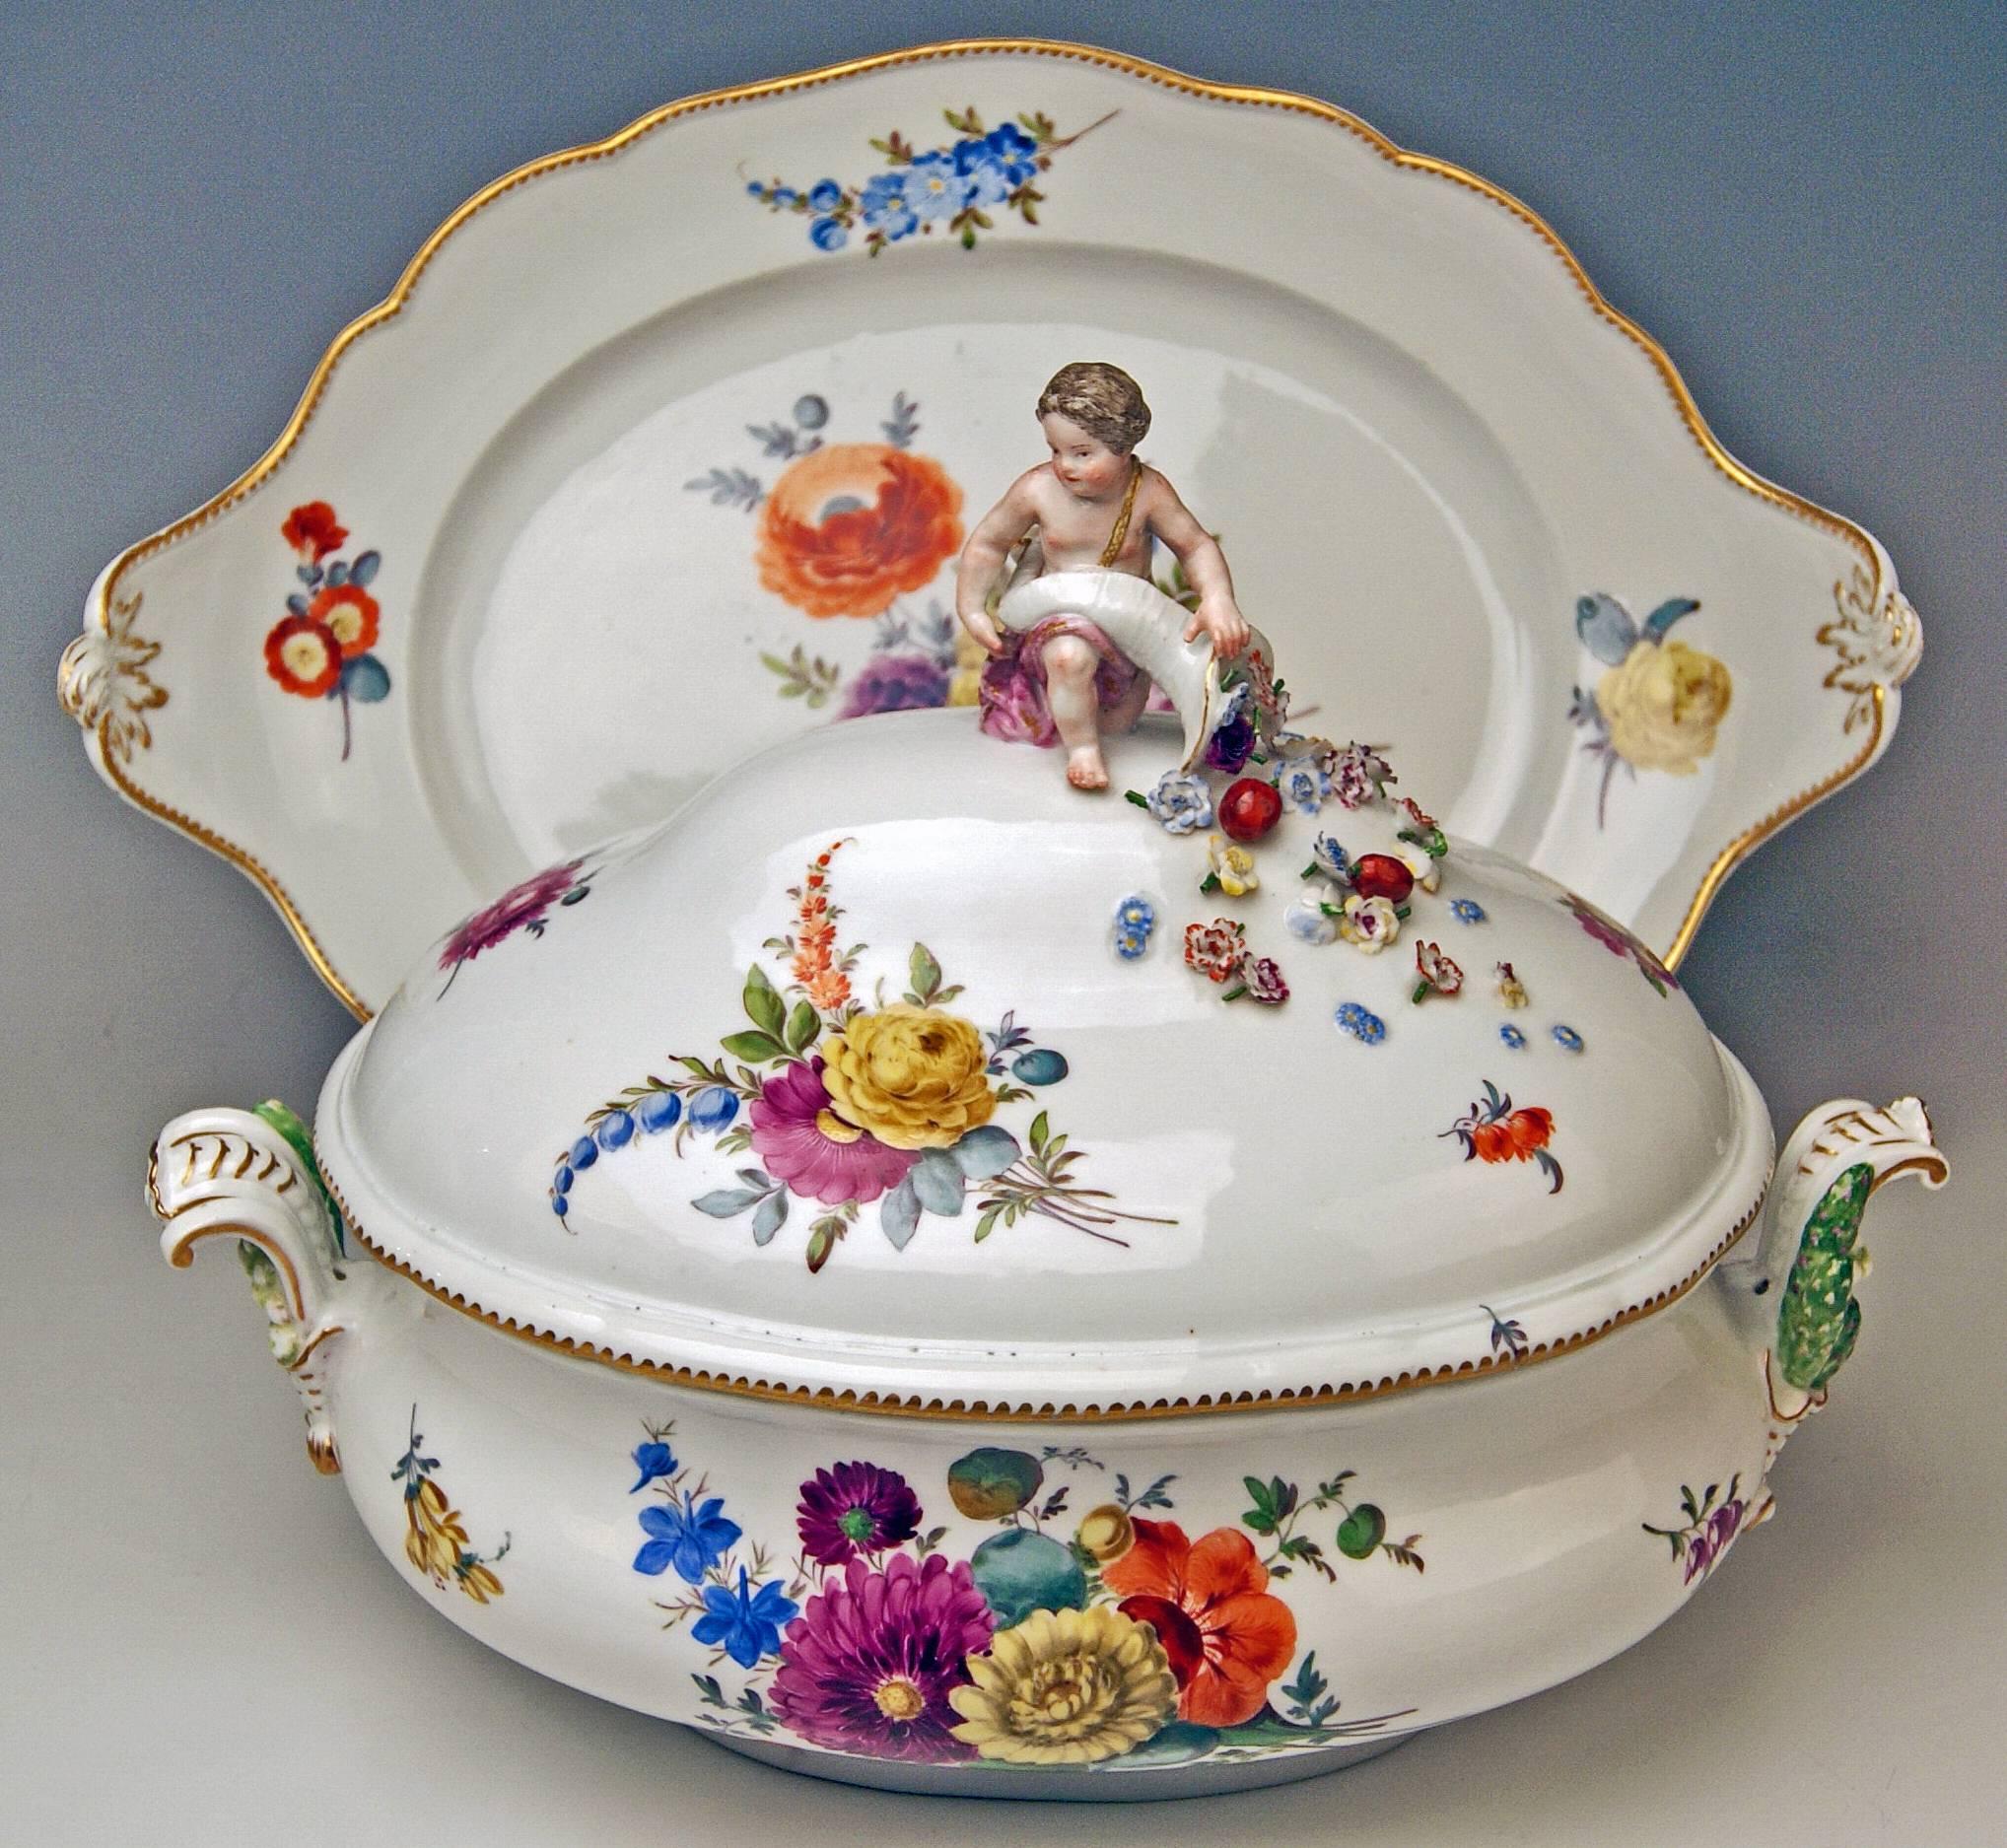 Meissen gorgeous items: Meissen lidded tureen with cherub holding Cornucopia and oval platter.

Dating: Rococo era = Marcolini period / made circa 1780
Material: white porcelain / glossy finish
Technique: porcelain (modelled and fired) /